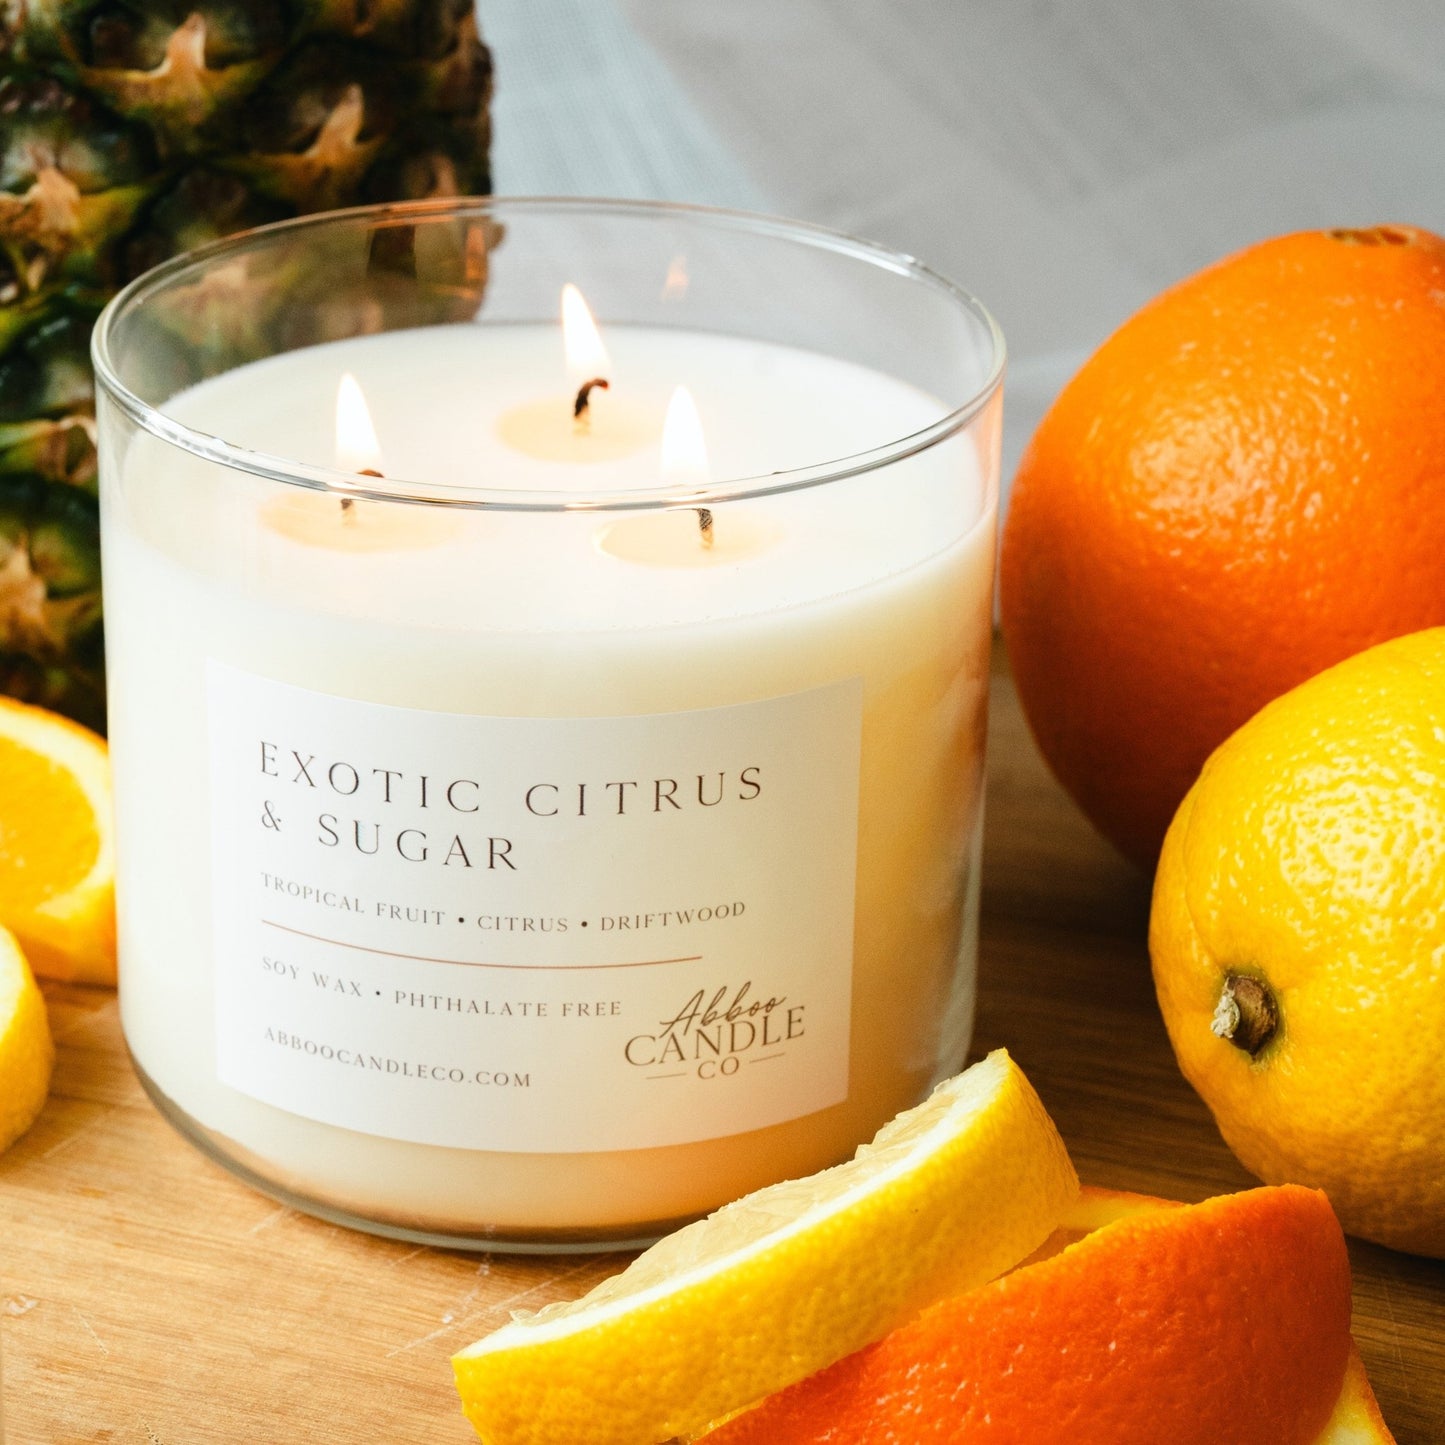 Exotic Citrus and Sugar 3-Wick Soy Candle - Abboo Candle Co